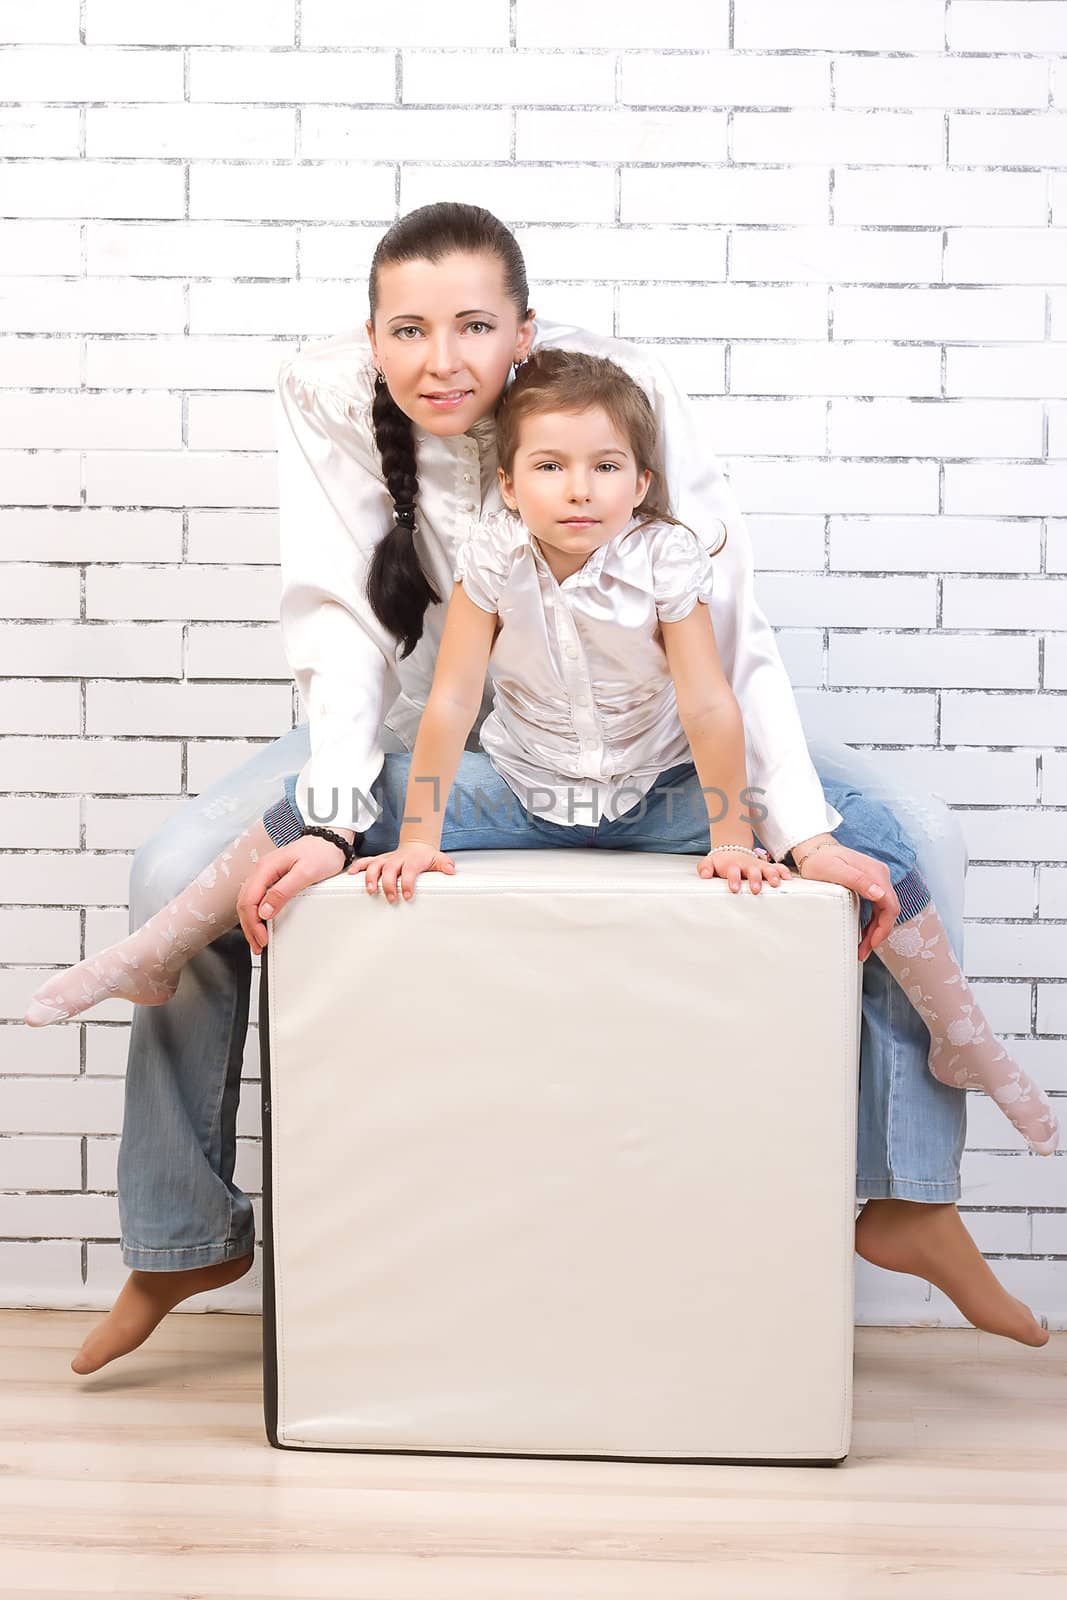 Mom and daughter in jeans and white shirt sitting in a chair in the shape of a cube